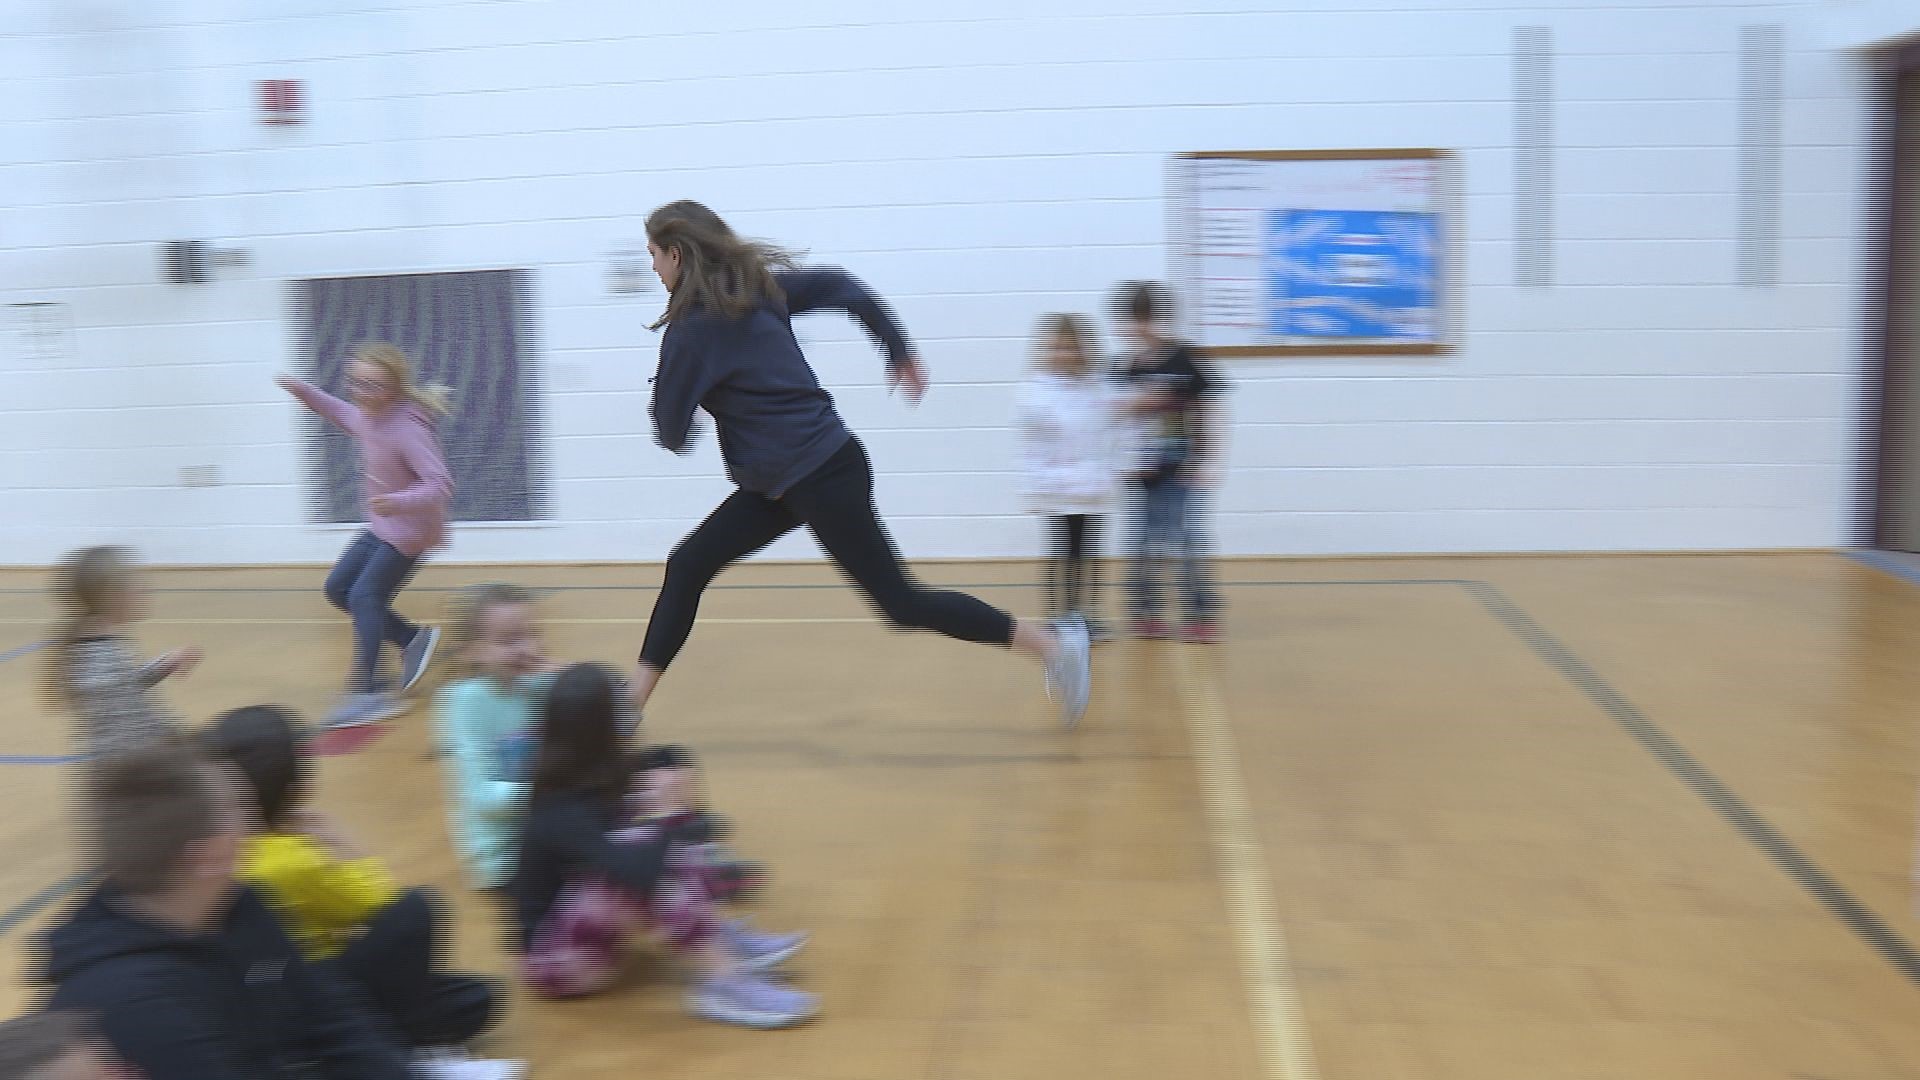 Our newest Teacher of the Week has three children who all attend Saranac Elementary School and has another on the way—and she's still helping students stay active.